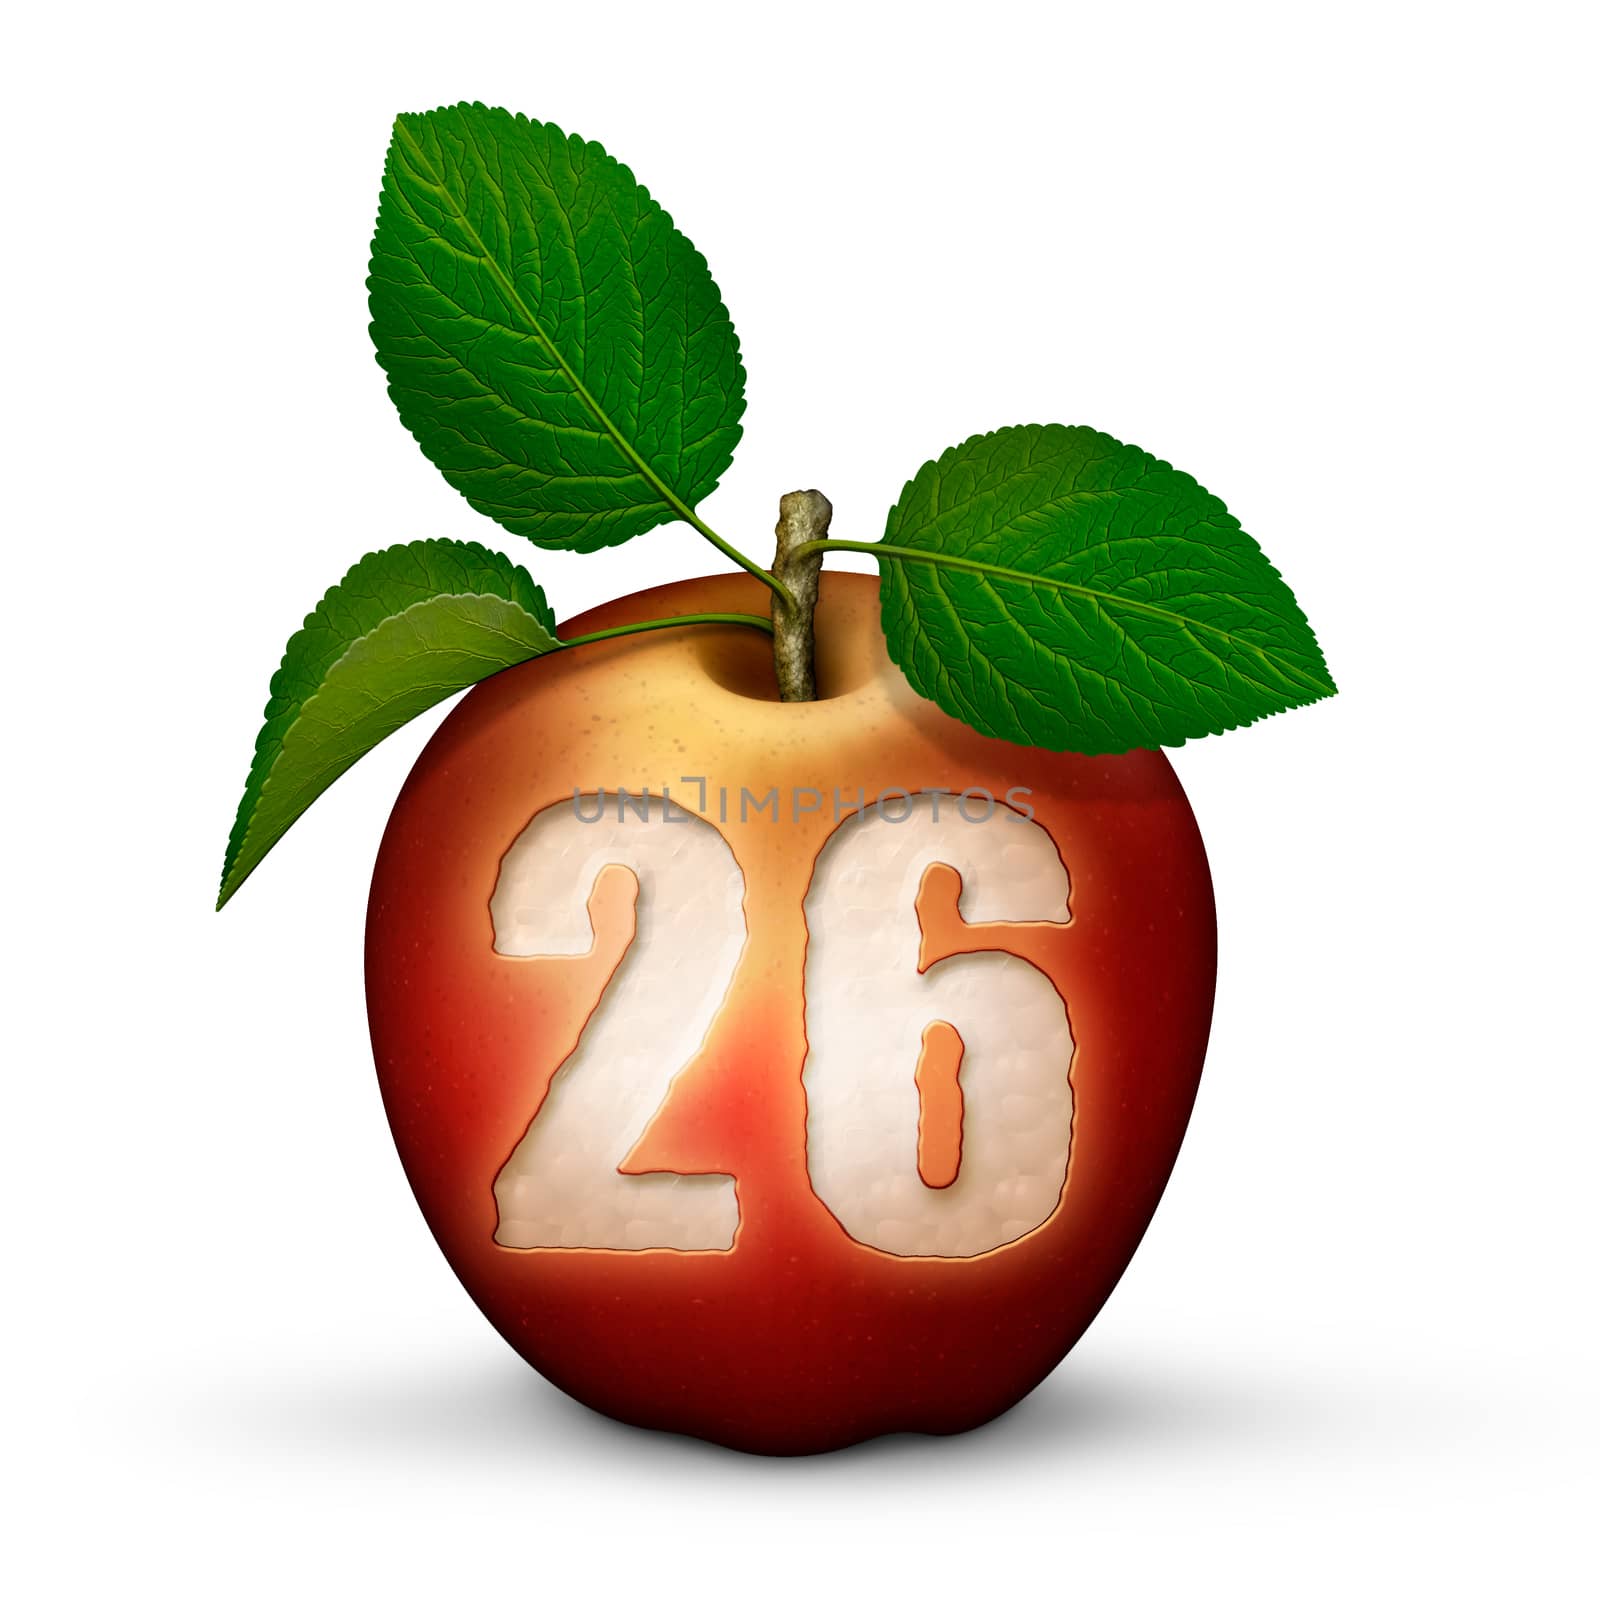 3D illustration of an apple with the number 26 bitten out of it.